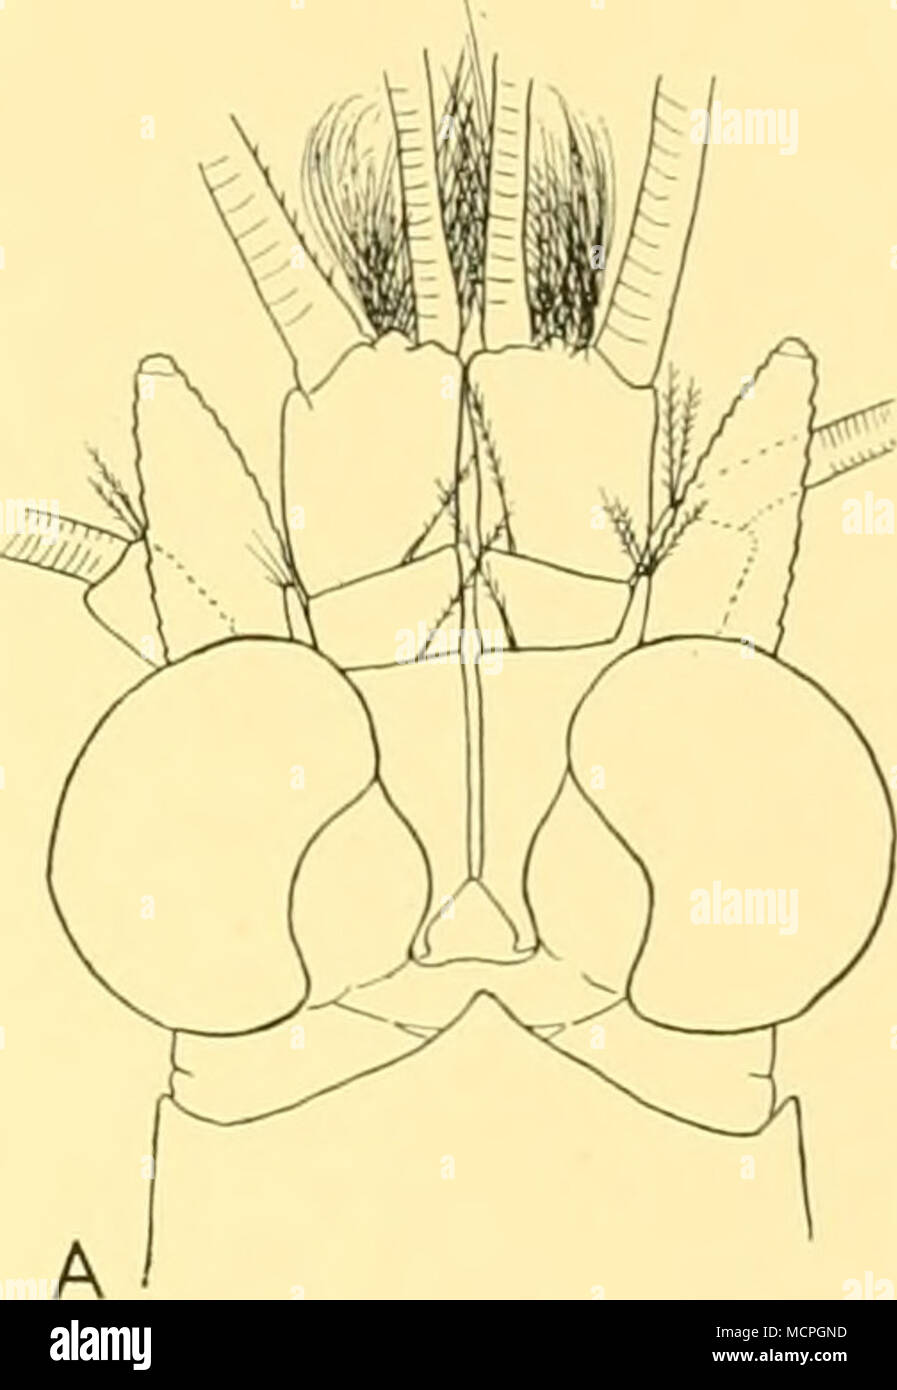 . Fig. 33. Mysidetes macrops sp.n. (A-G). A, anterior end of male in dorsal view, x 12; B, left antennular peduncle, x 16, C, left antenna, x 16; D, mandible, x 16; E, eighth thoracic appendage of male, x 12; F, left uropod, x 16; G, telson of female, x 16. Mysidetes crassa Hansen. H, telson and left uropod, x 16. Mysidetes intermedia sp.n. Occurrence: ^ *' ^ ' St. 51. 4. v. 26 (day). East Falkland I., 105-115 m., 1 imm. 3, 13-6 mm. St. WS 243. 17. vii. 28 (dusk to dark). West of Falkland Is., 144-141 m., 1 imm. specimen, badly damaged. St. WS 748. 16. ix. 31 (night). Magellan Strait, 30o(-o)  Stock Photo